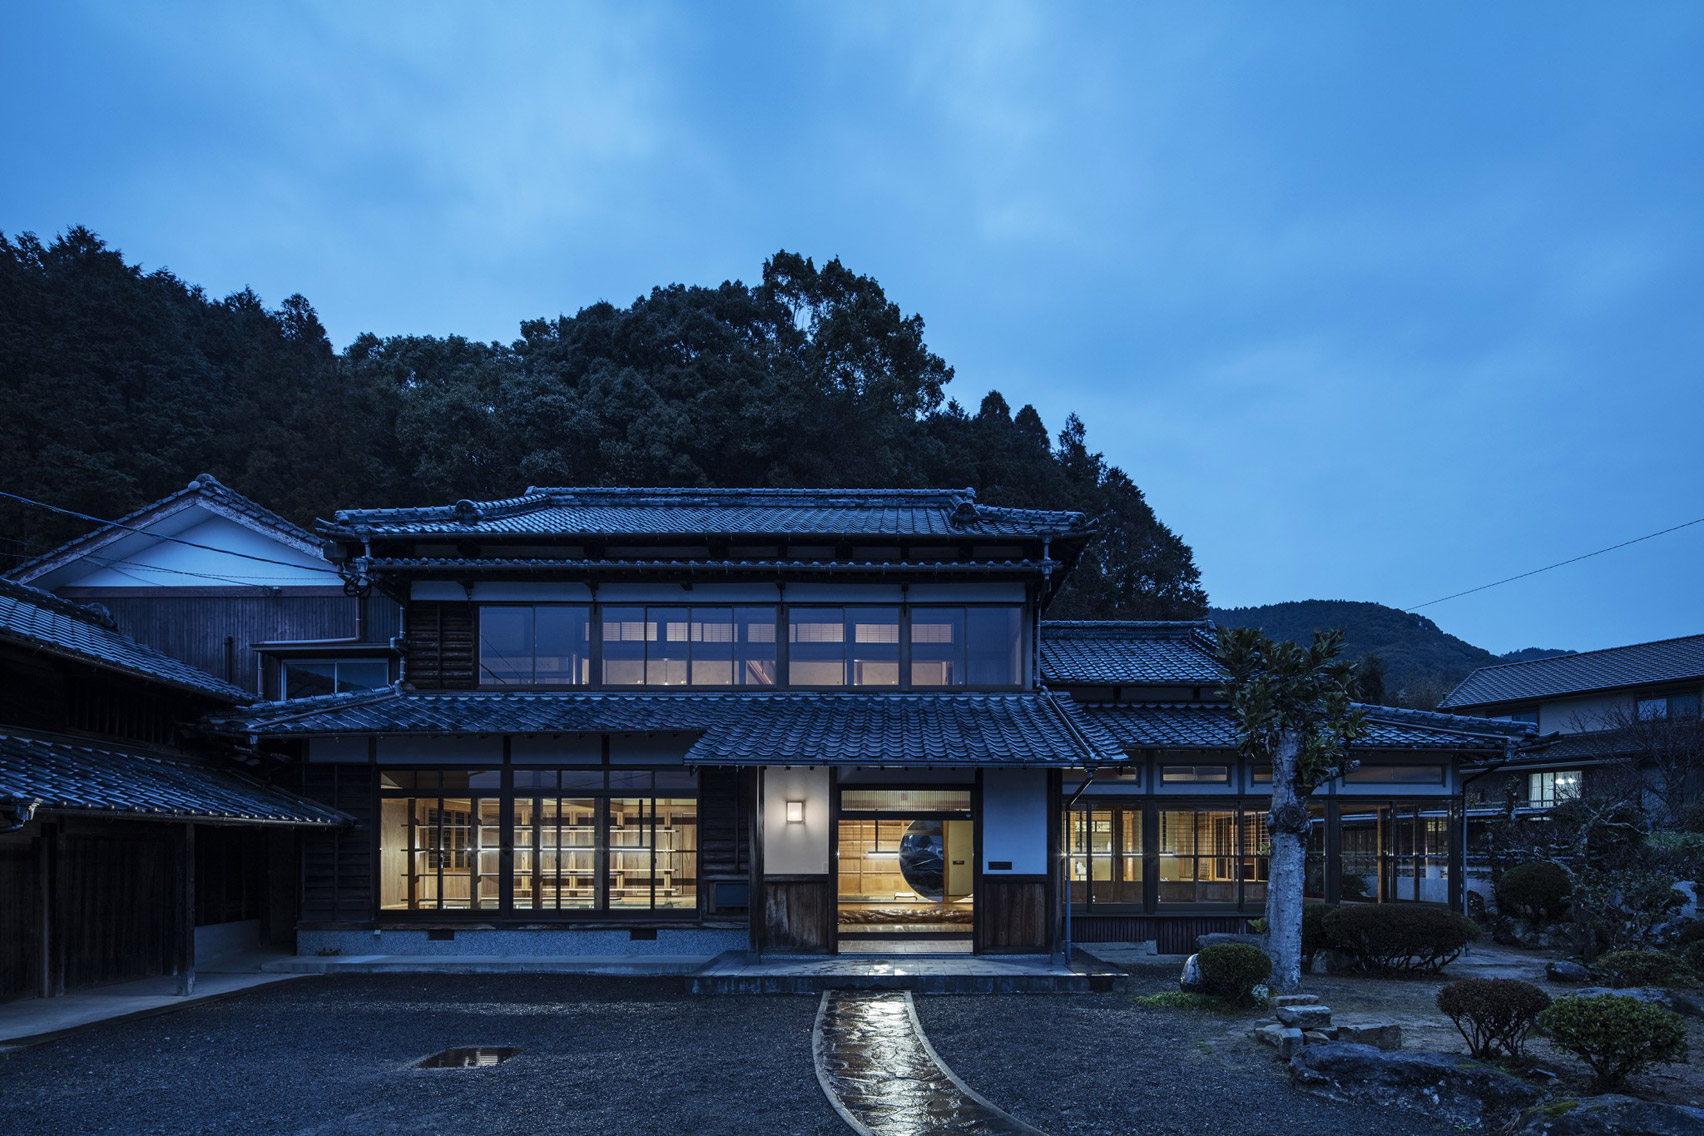 Exterior of Maruhiro office in converted Japanese house at dusk